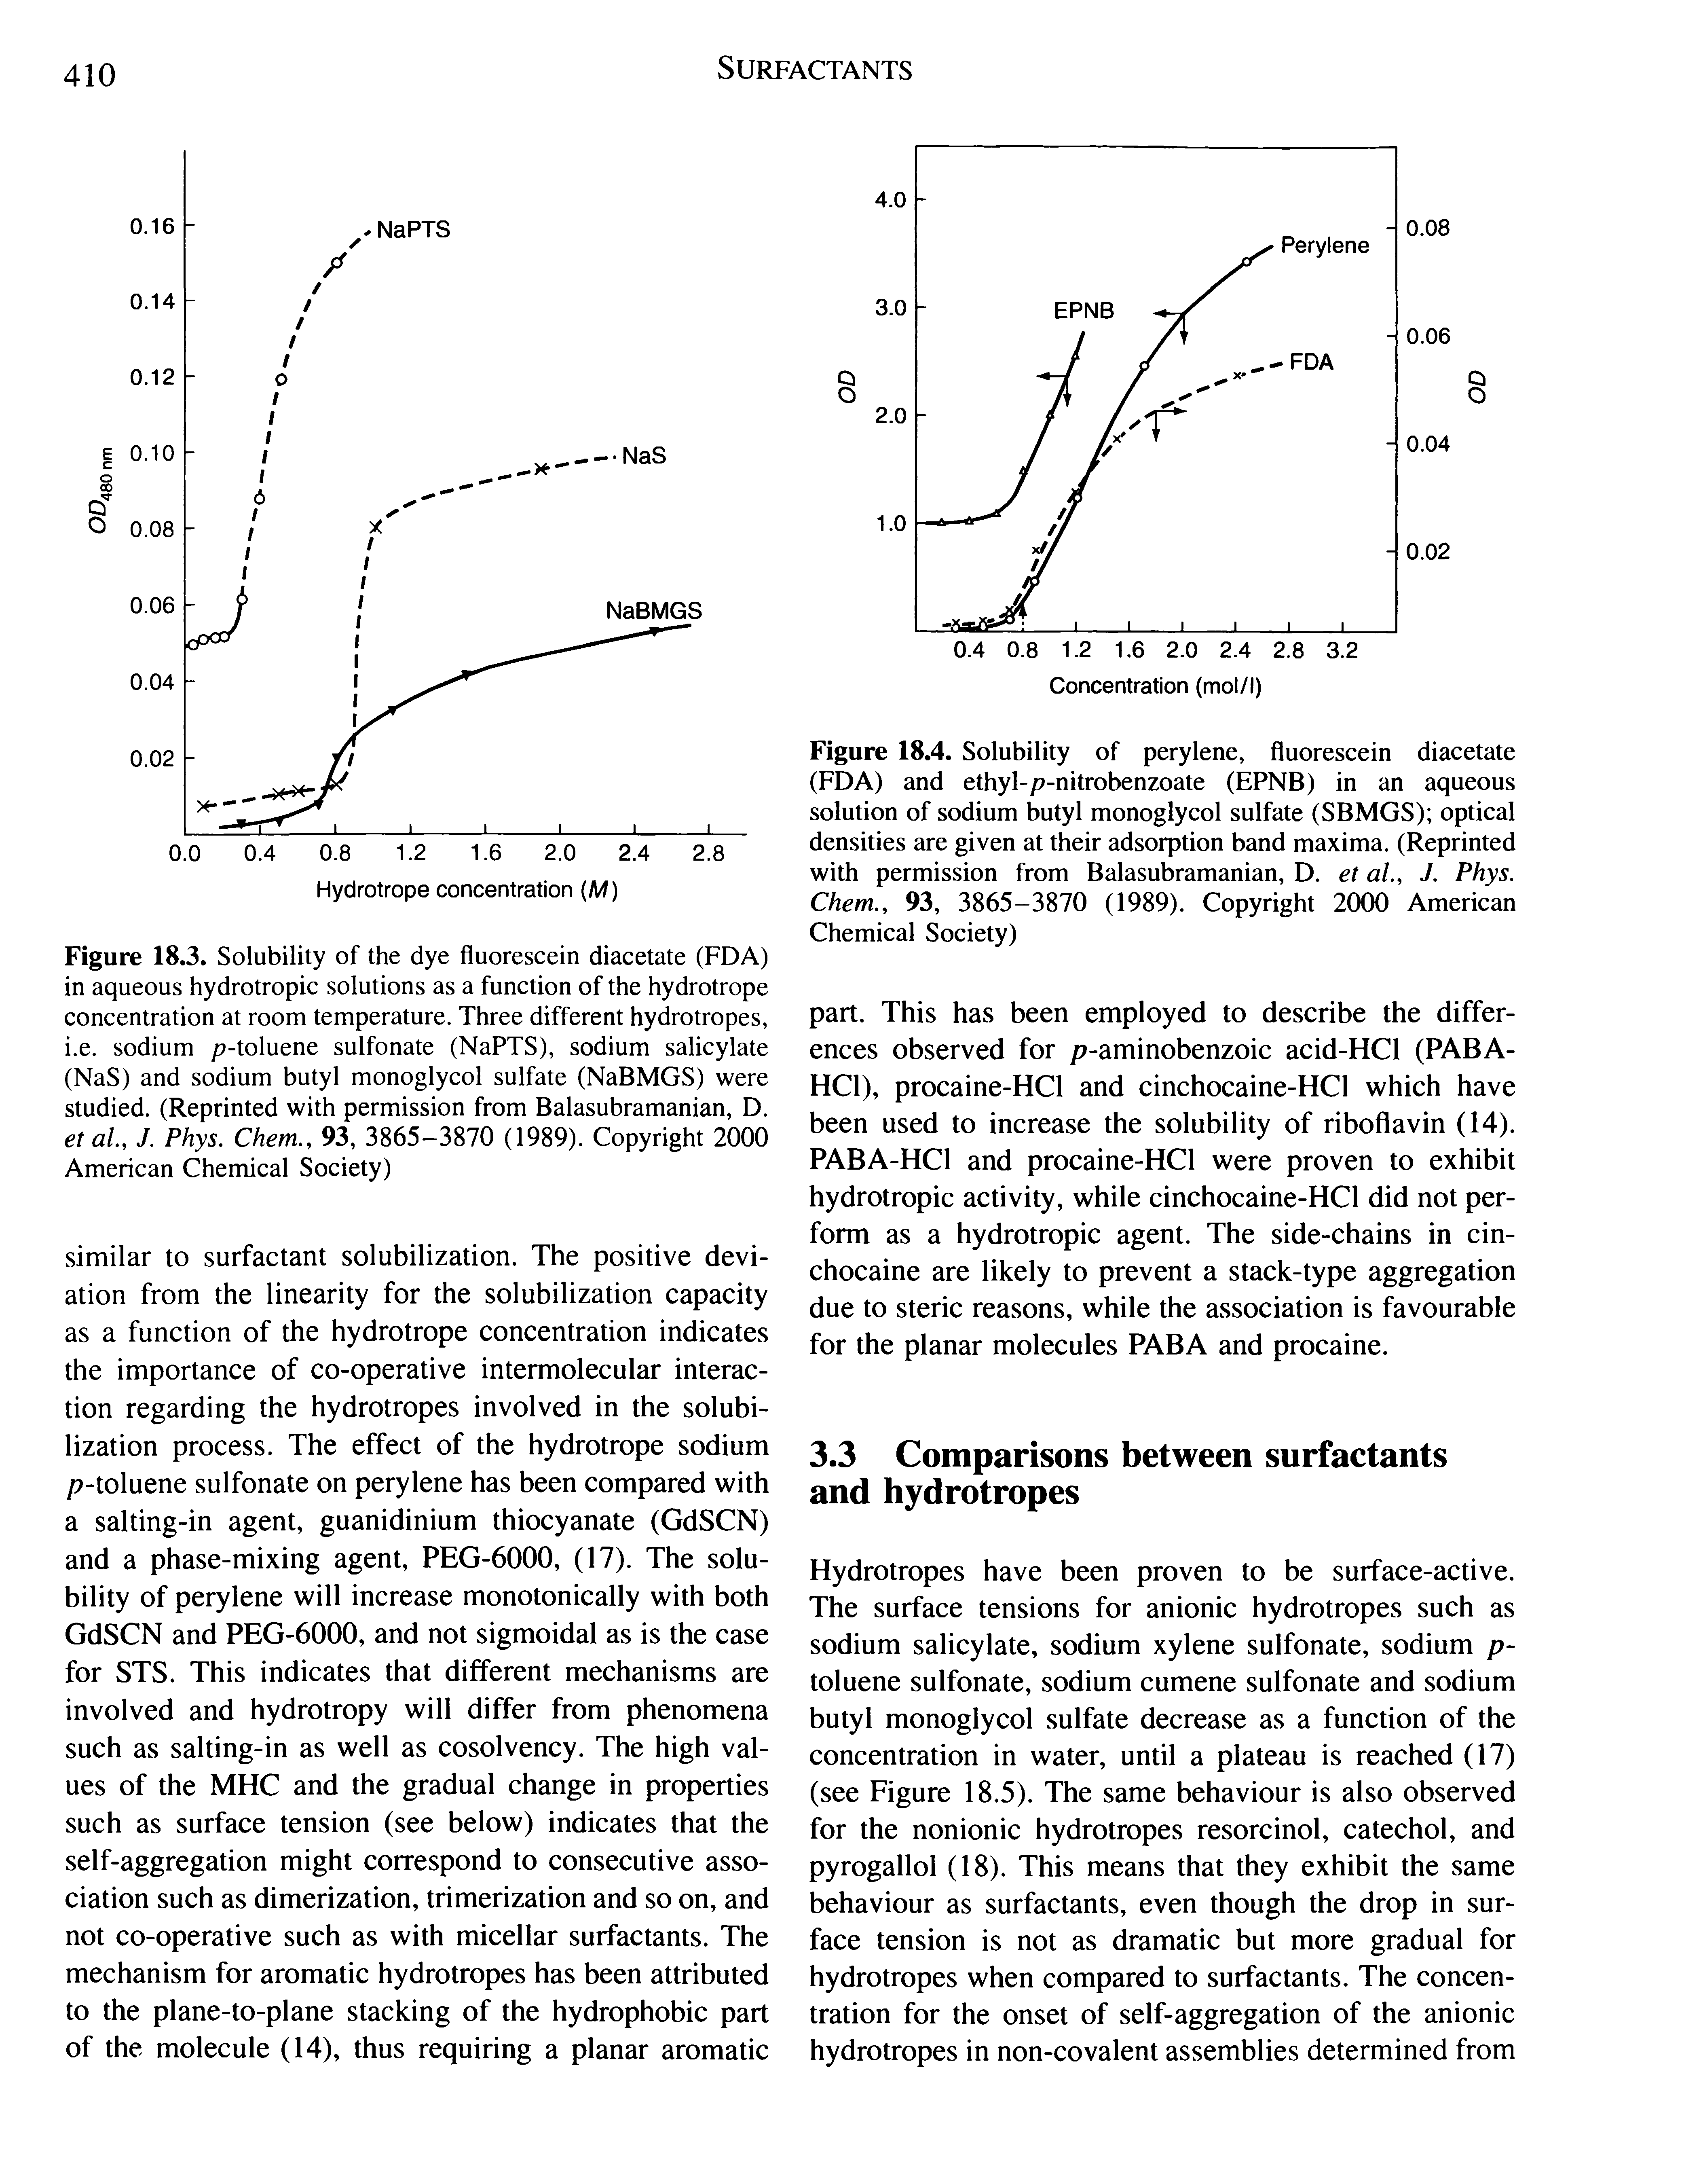 Figure 18.3. Solubility of the dye fluorescein diacetate (FDA) in aqueous hydrotropic solutions as a function of the hydrotrope concentration at room temperature. Three different hydrotropes, i.e. sodium p-toluene sulfonate (NaPTS), sodium salicylate (NaS) and sodium butyl monoglycol sulfate (NaBMGS) were studied. (Reprinted with permission from Balasubramanian, D. et al., J. Phys. Chem., 93, 3865-3870 (1989). Copyright 2000 American Chemical Society)...